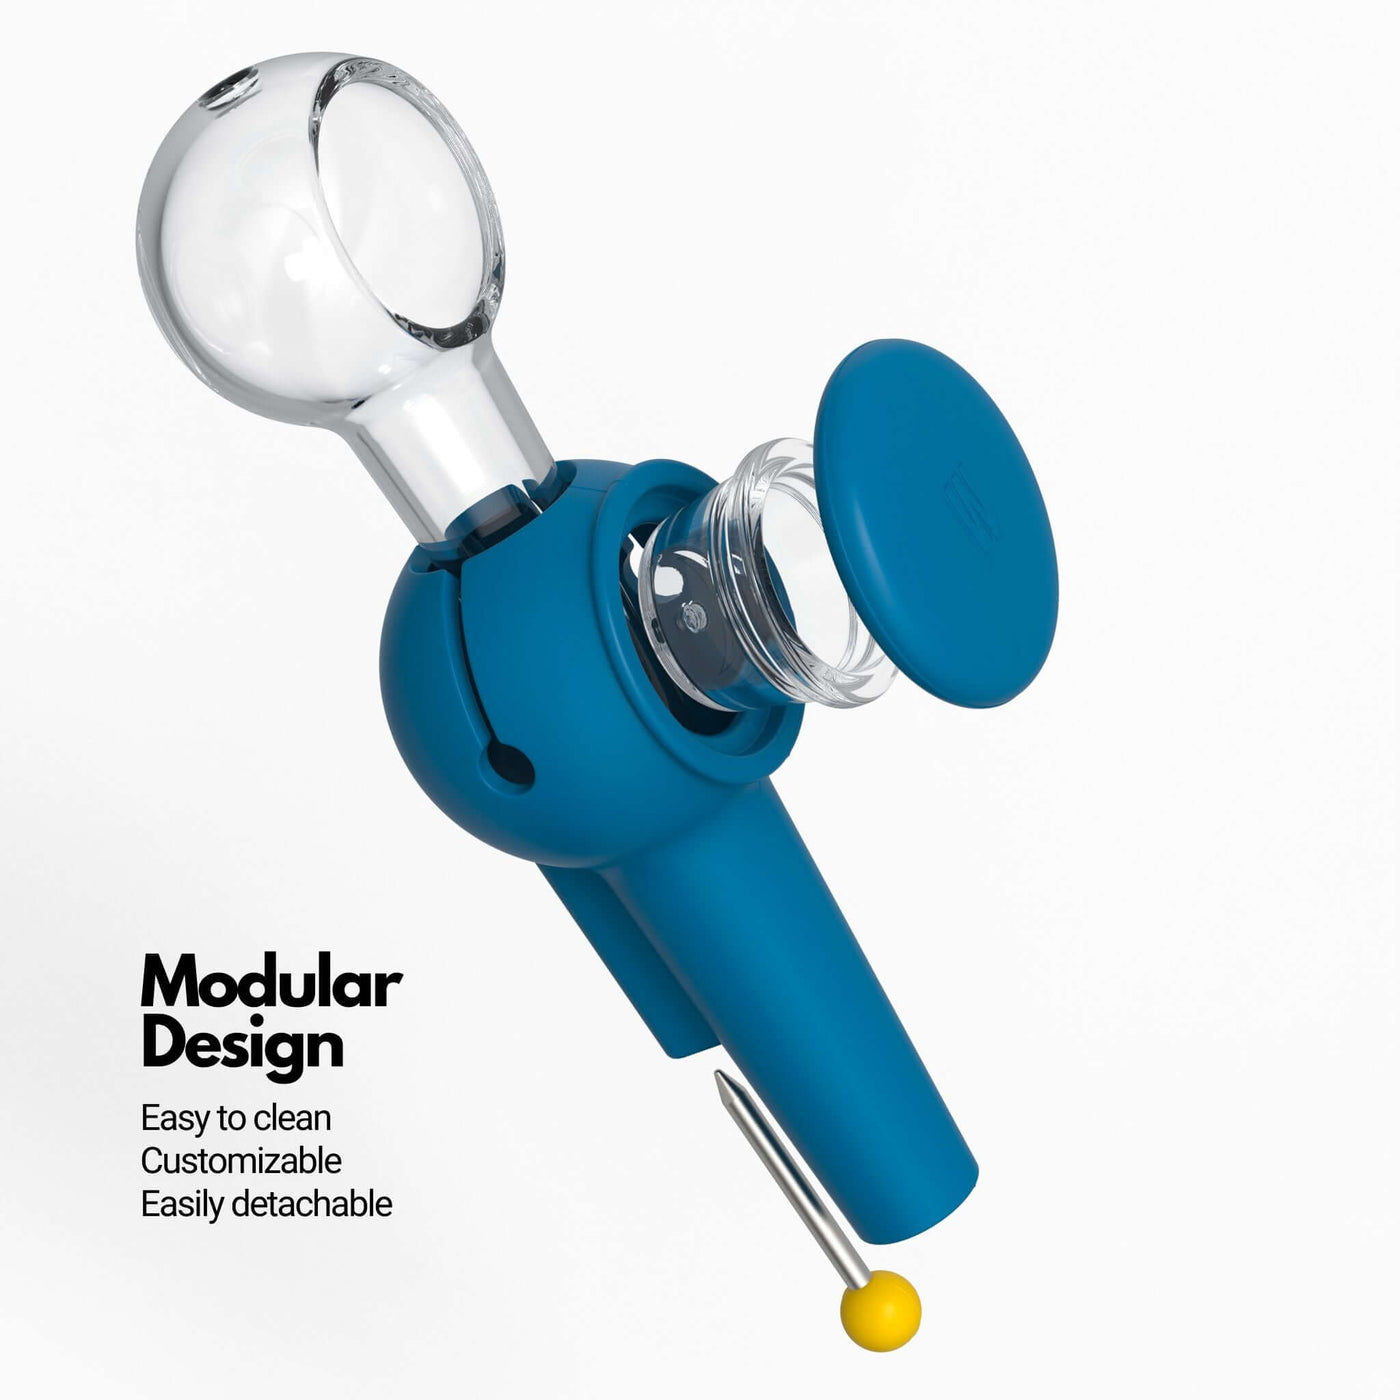 Exploded view infographic of Weeday spoon pipe (in midnight blue color), highlighting its customizable and detachable features.